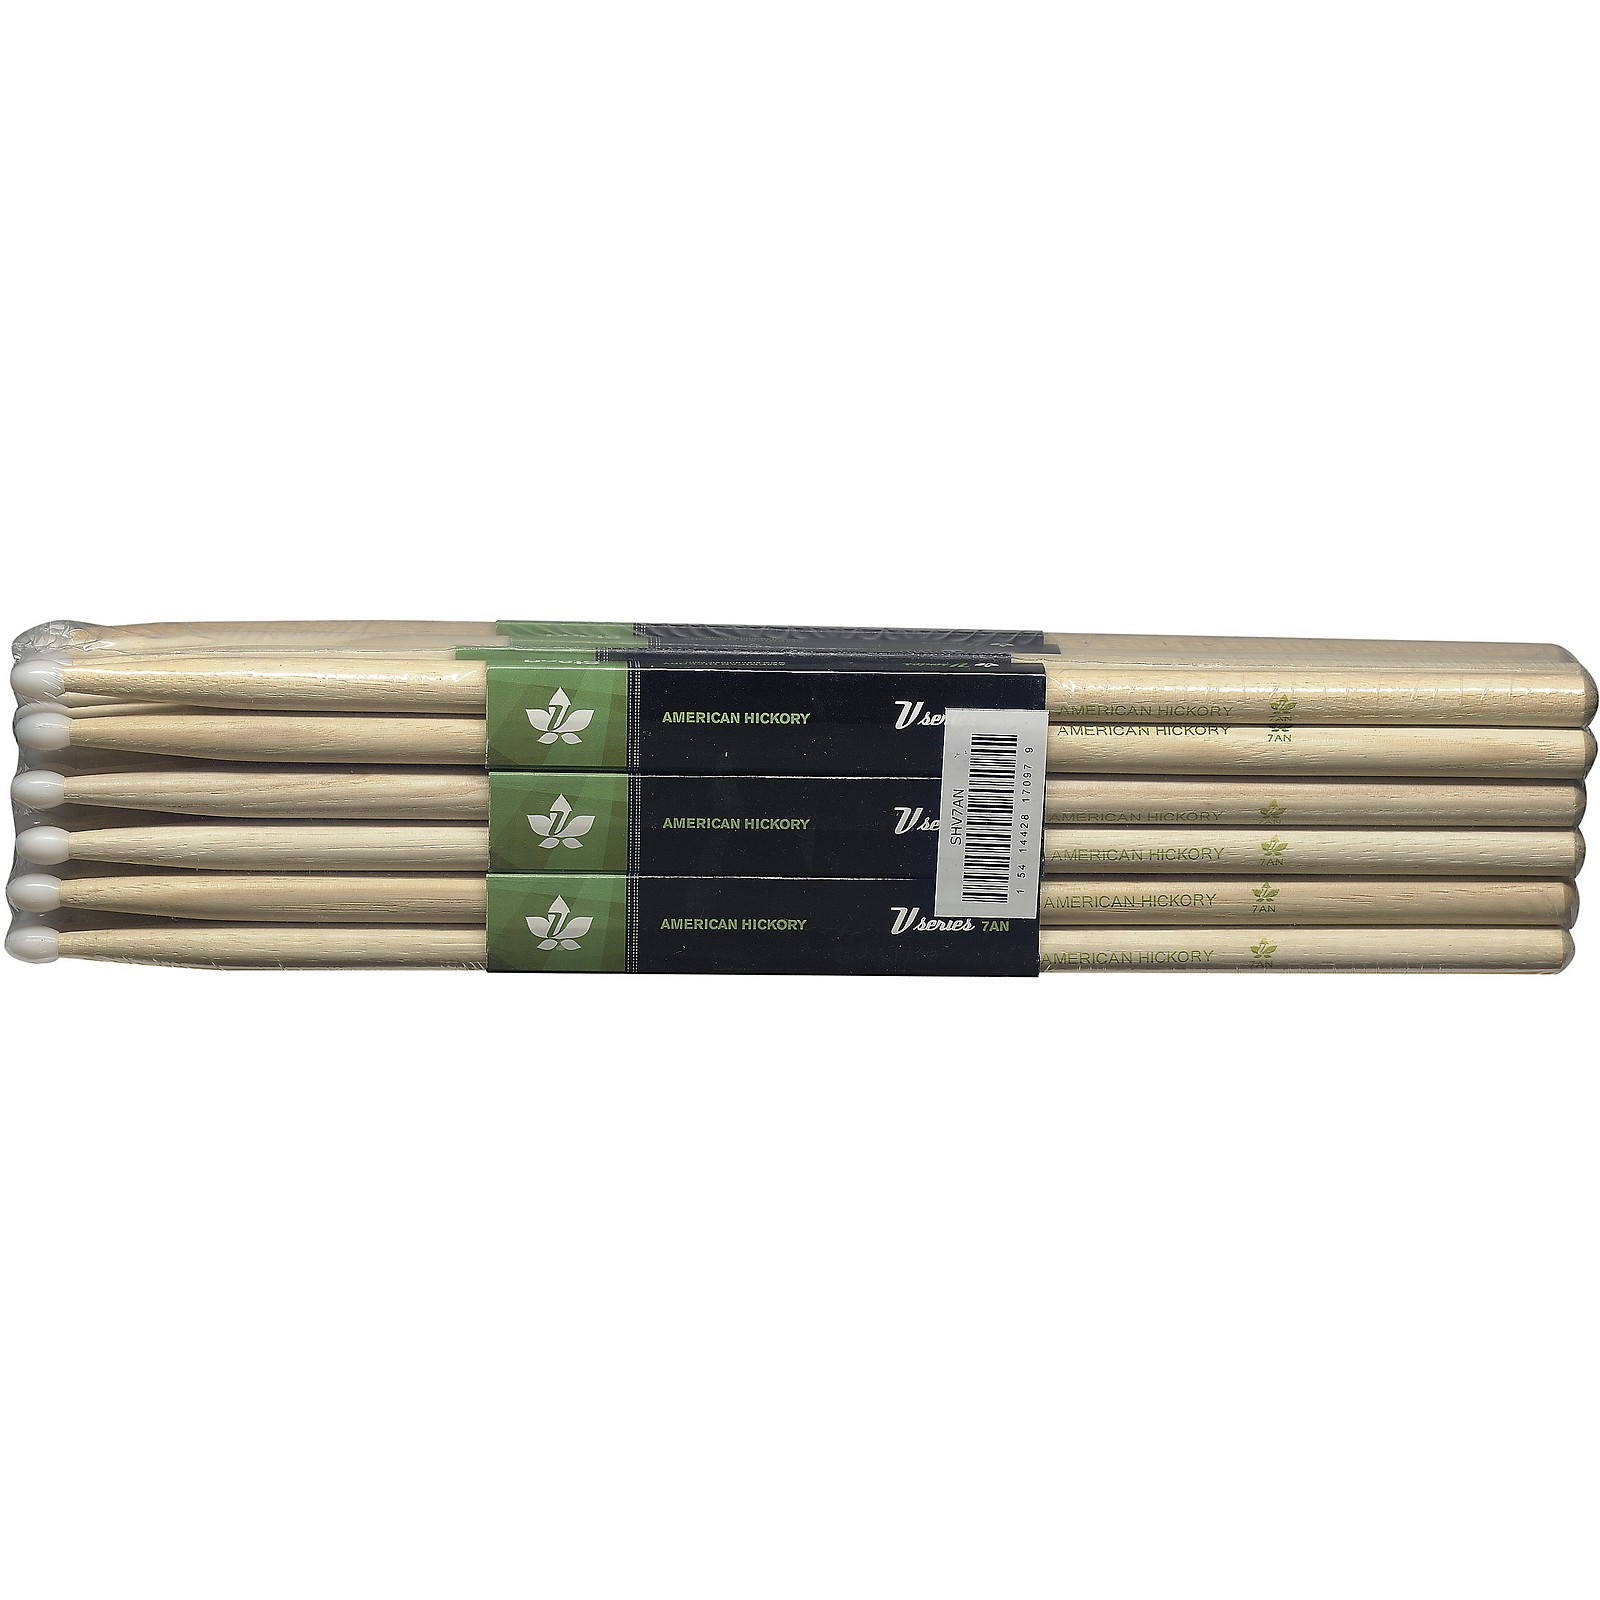 Stagg Stagg 12-Pair American Hickory Drum Sticks Nylon Tip